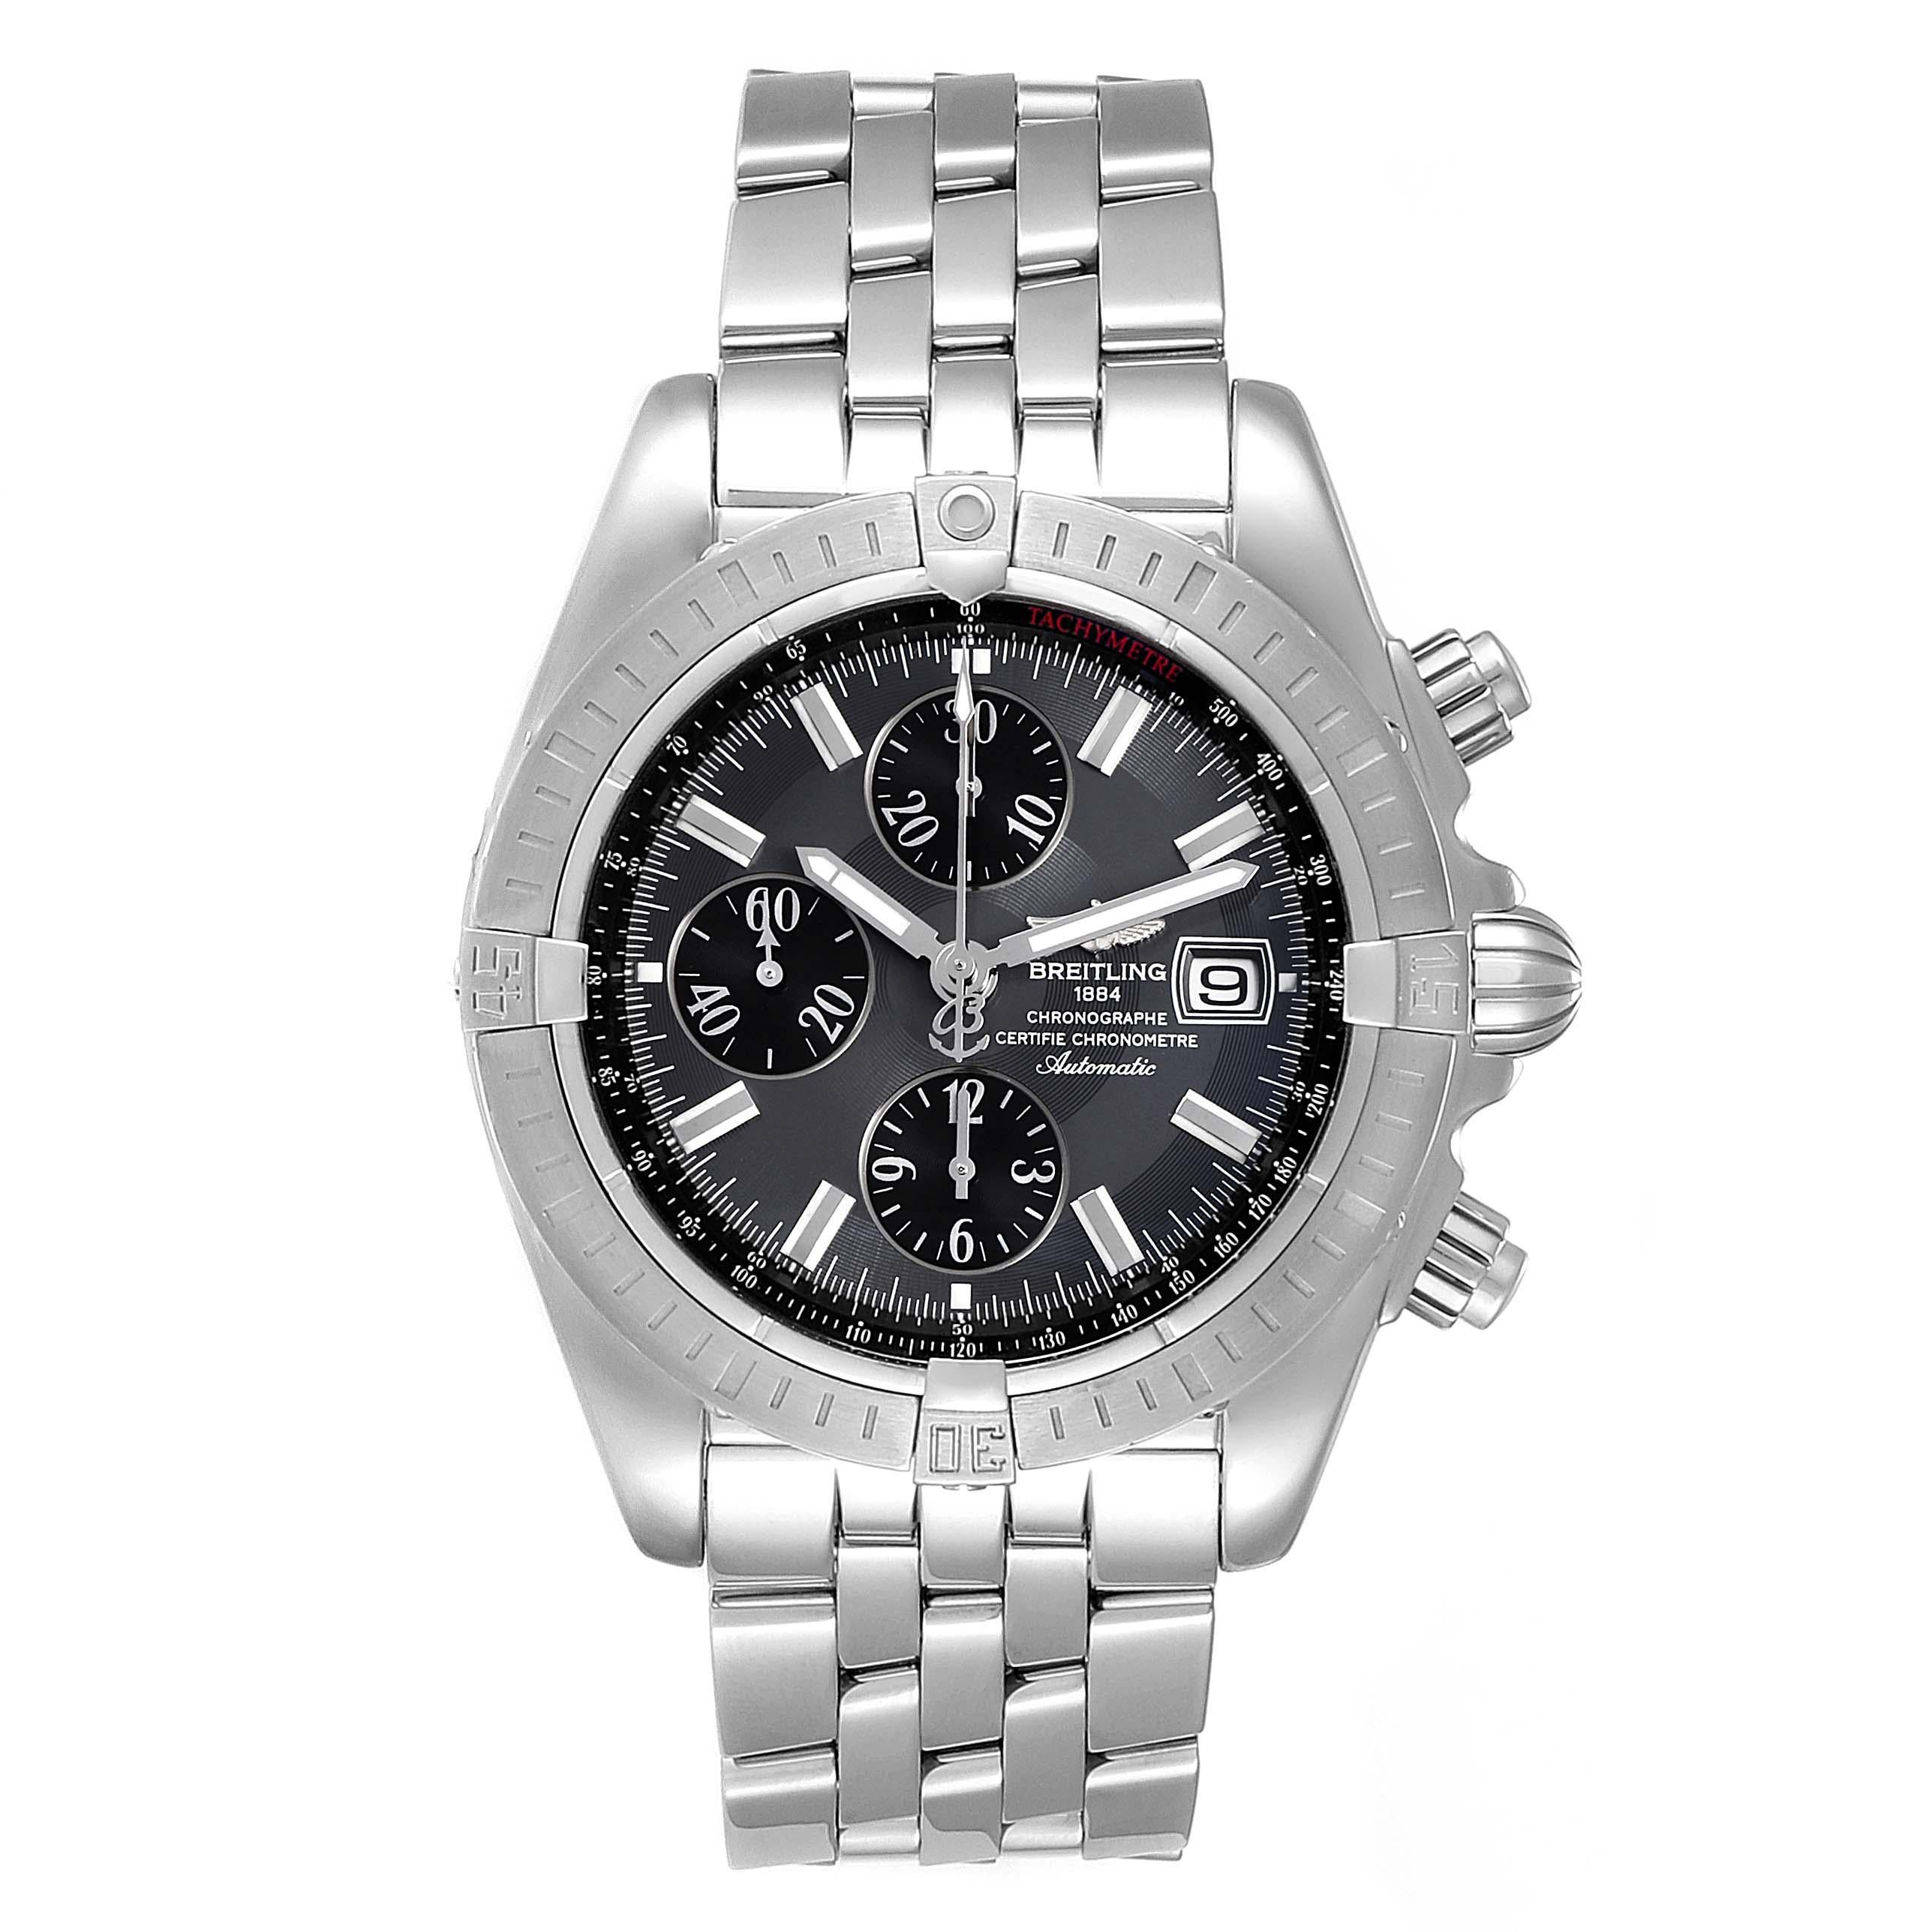 Breitling Chronomat Evolution Grey Dial Steel Mens Watch A13356. Automatic self-winding officially certified chronometer movement. Chronograph function. Stainless steel case 43.7 mm in diameter with screwed-down crown and pushers. Stainless steel